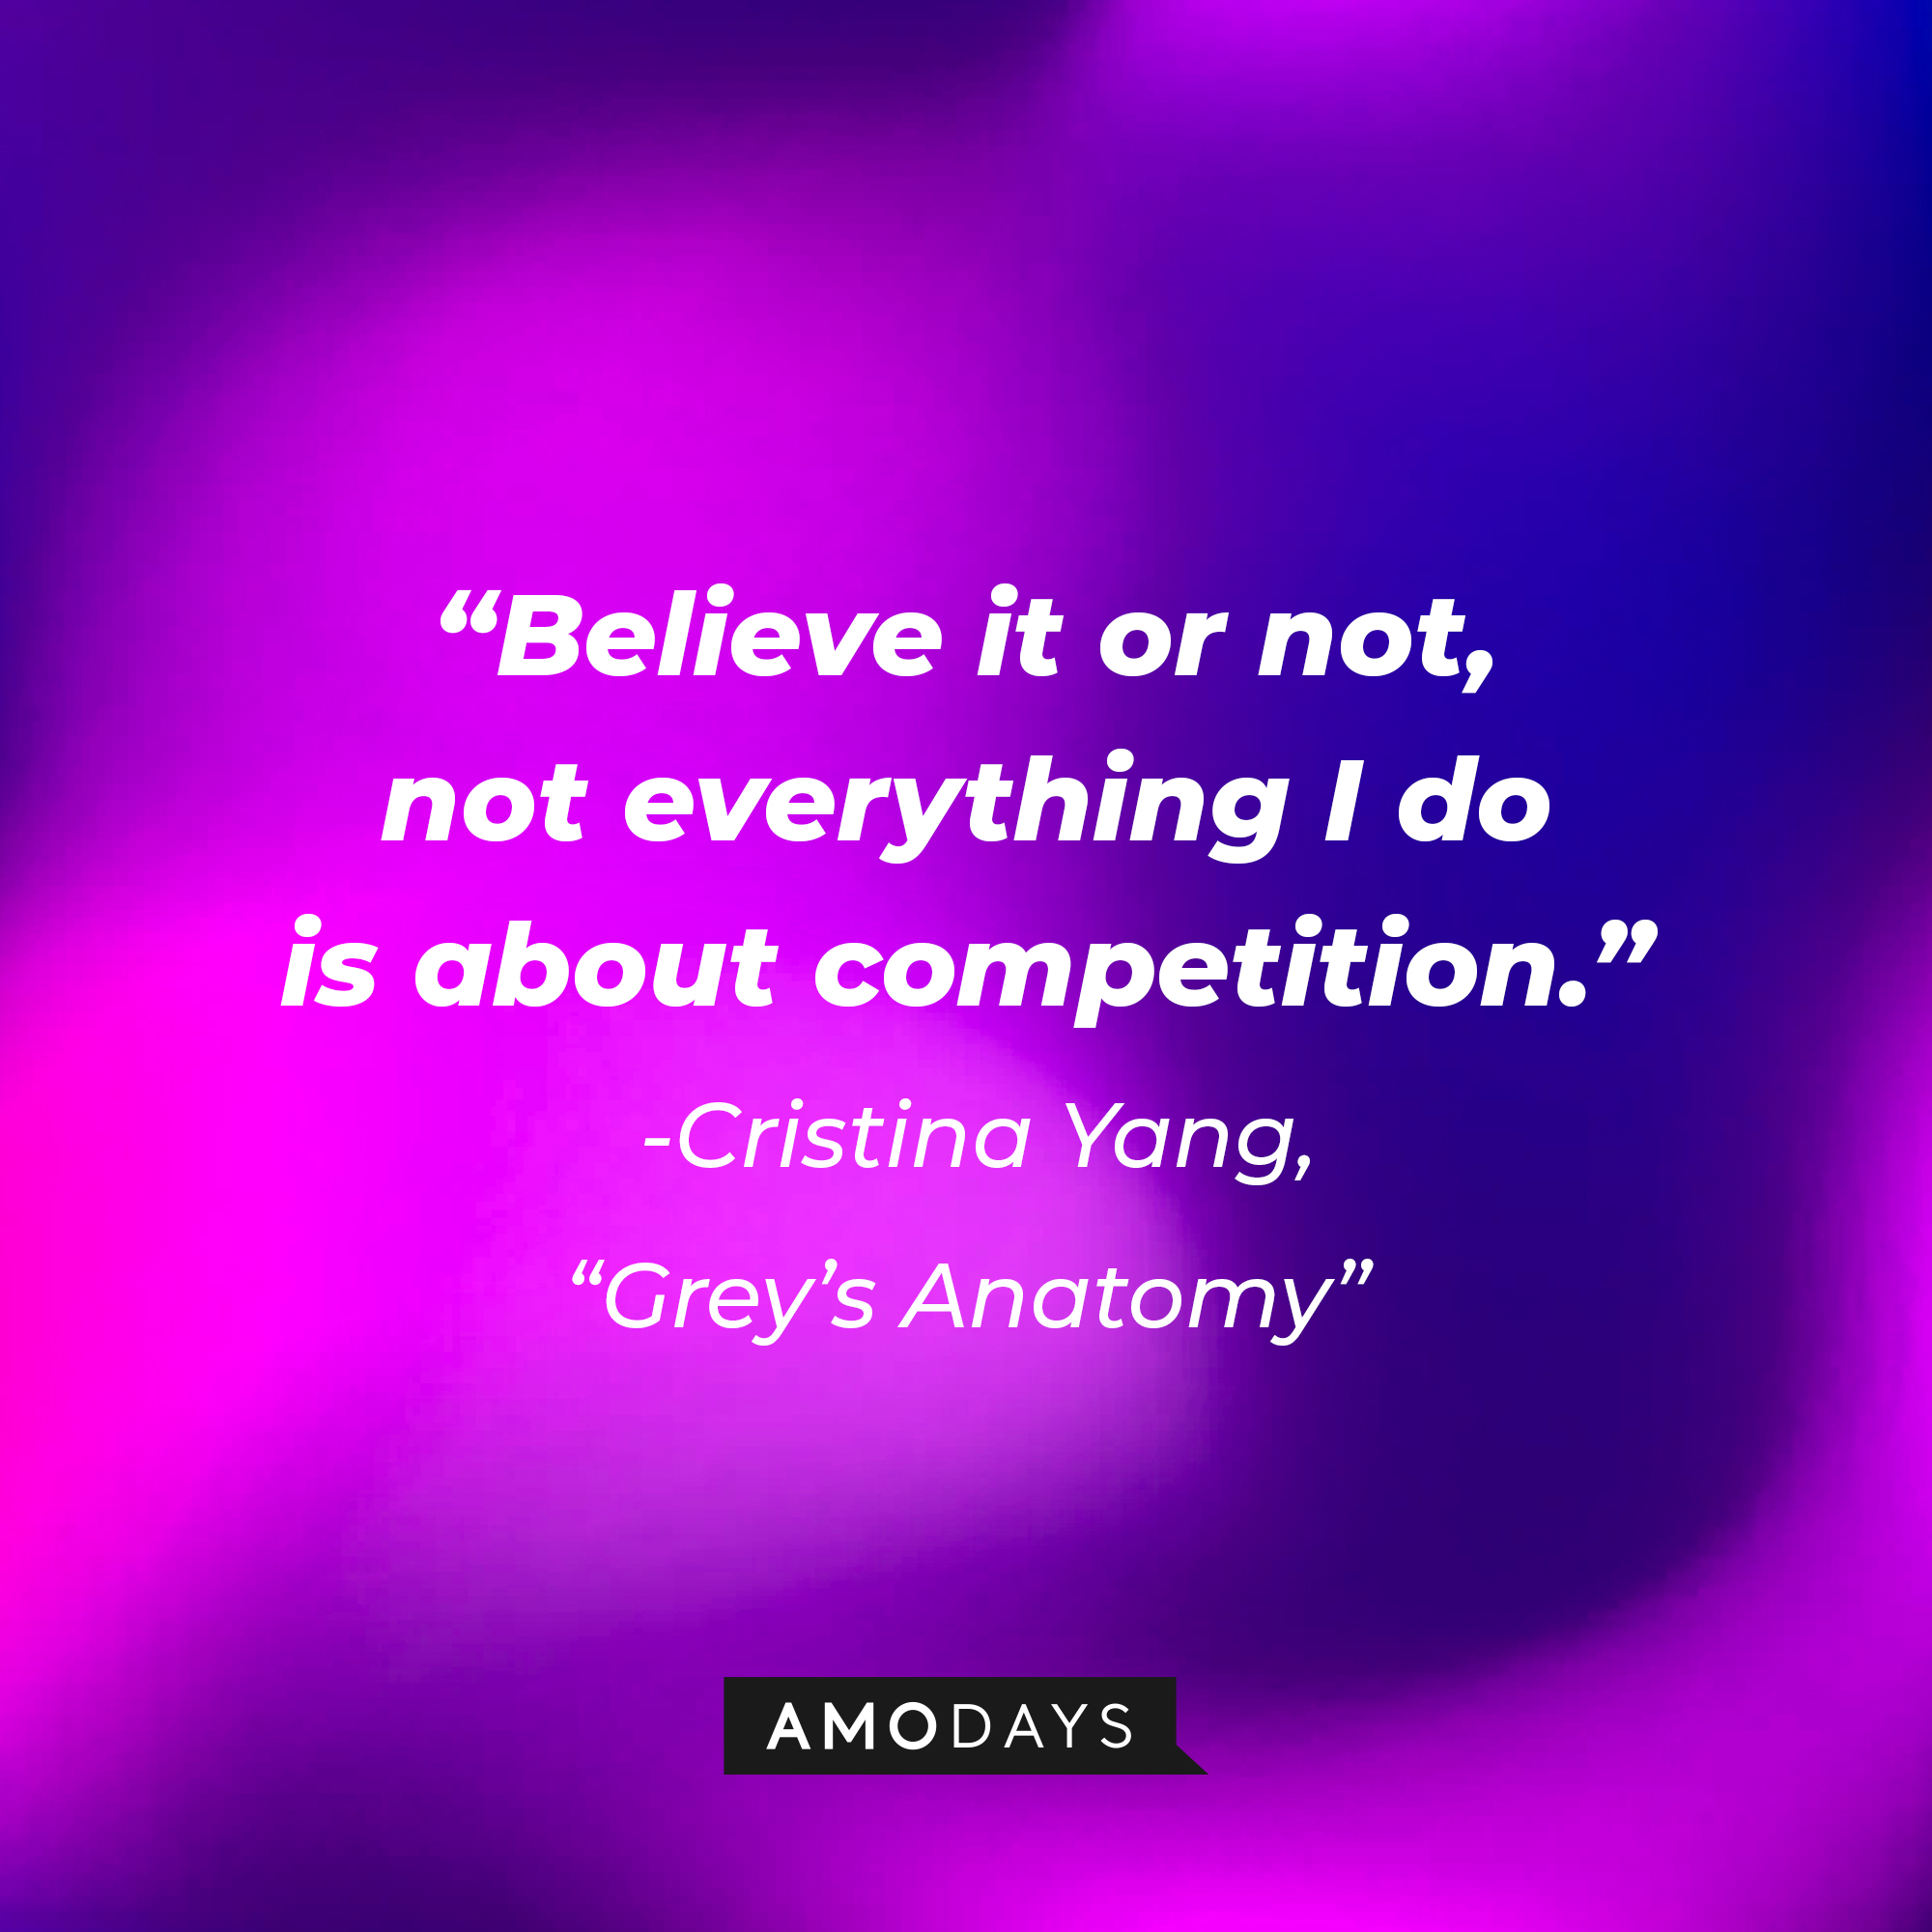 Cristina Yang's quote on "Grey's Anatomy:" “Believe it or not, not everything I do is about competition.” | Source: AmoDays